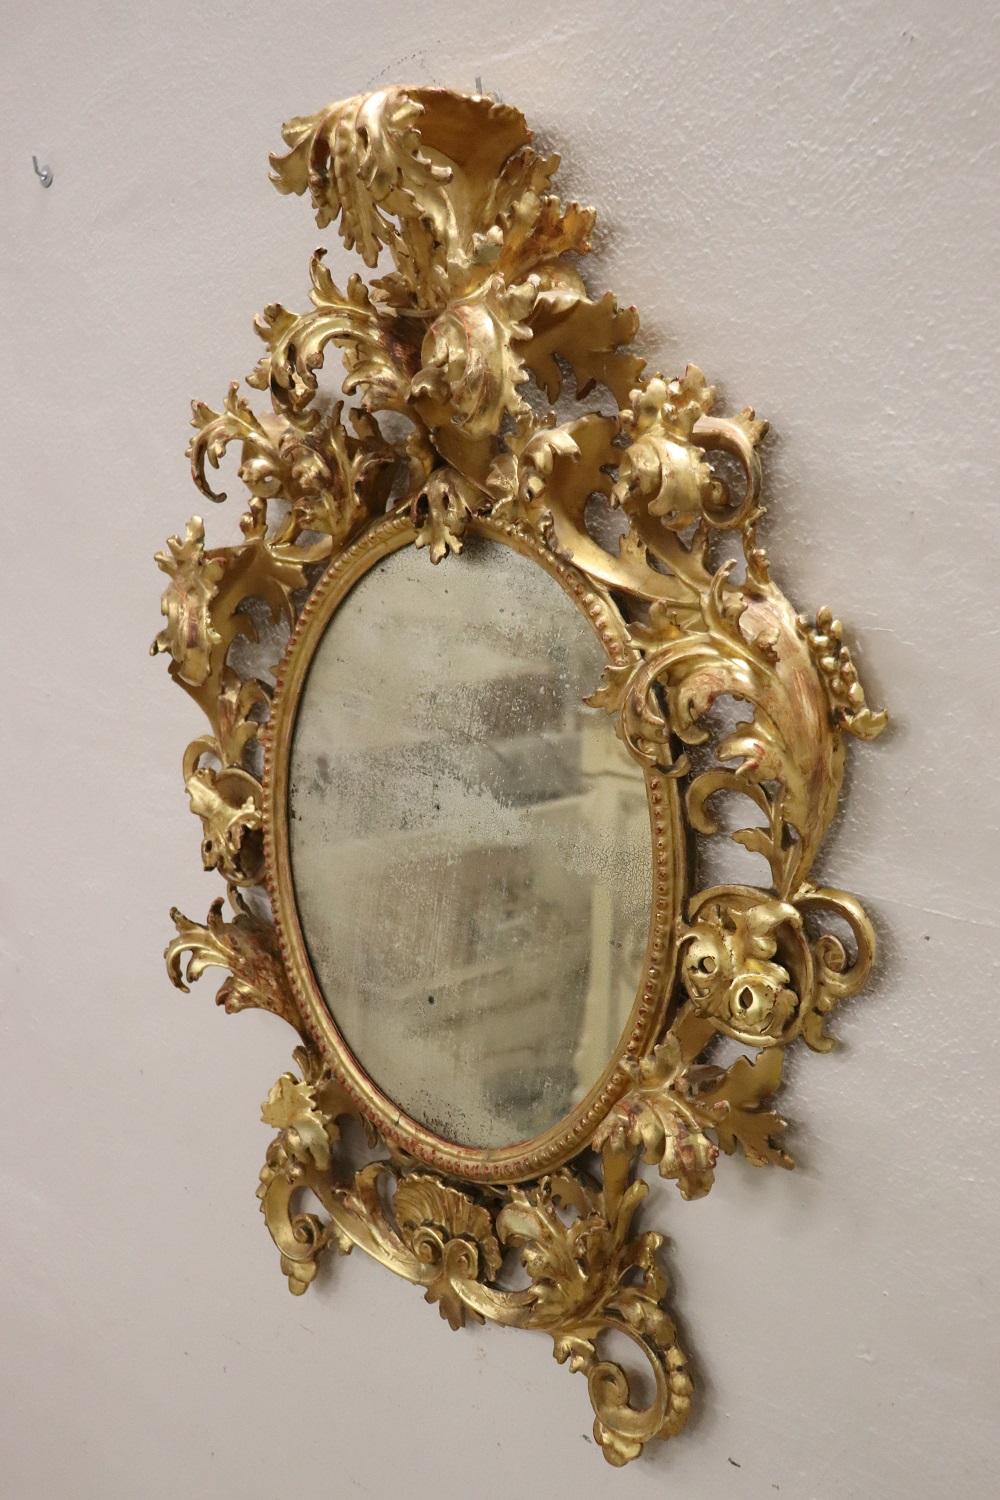 Very important beautiful and elegant oval wall mirror of the period baroque, 1750. Made entirely of carved and gilded wood with gold leaf. The rich carving decoration with volutes and acanthus leaves that curl up on the front is called 